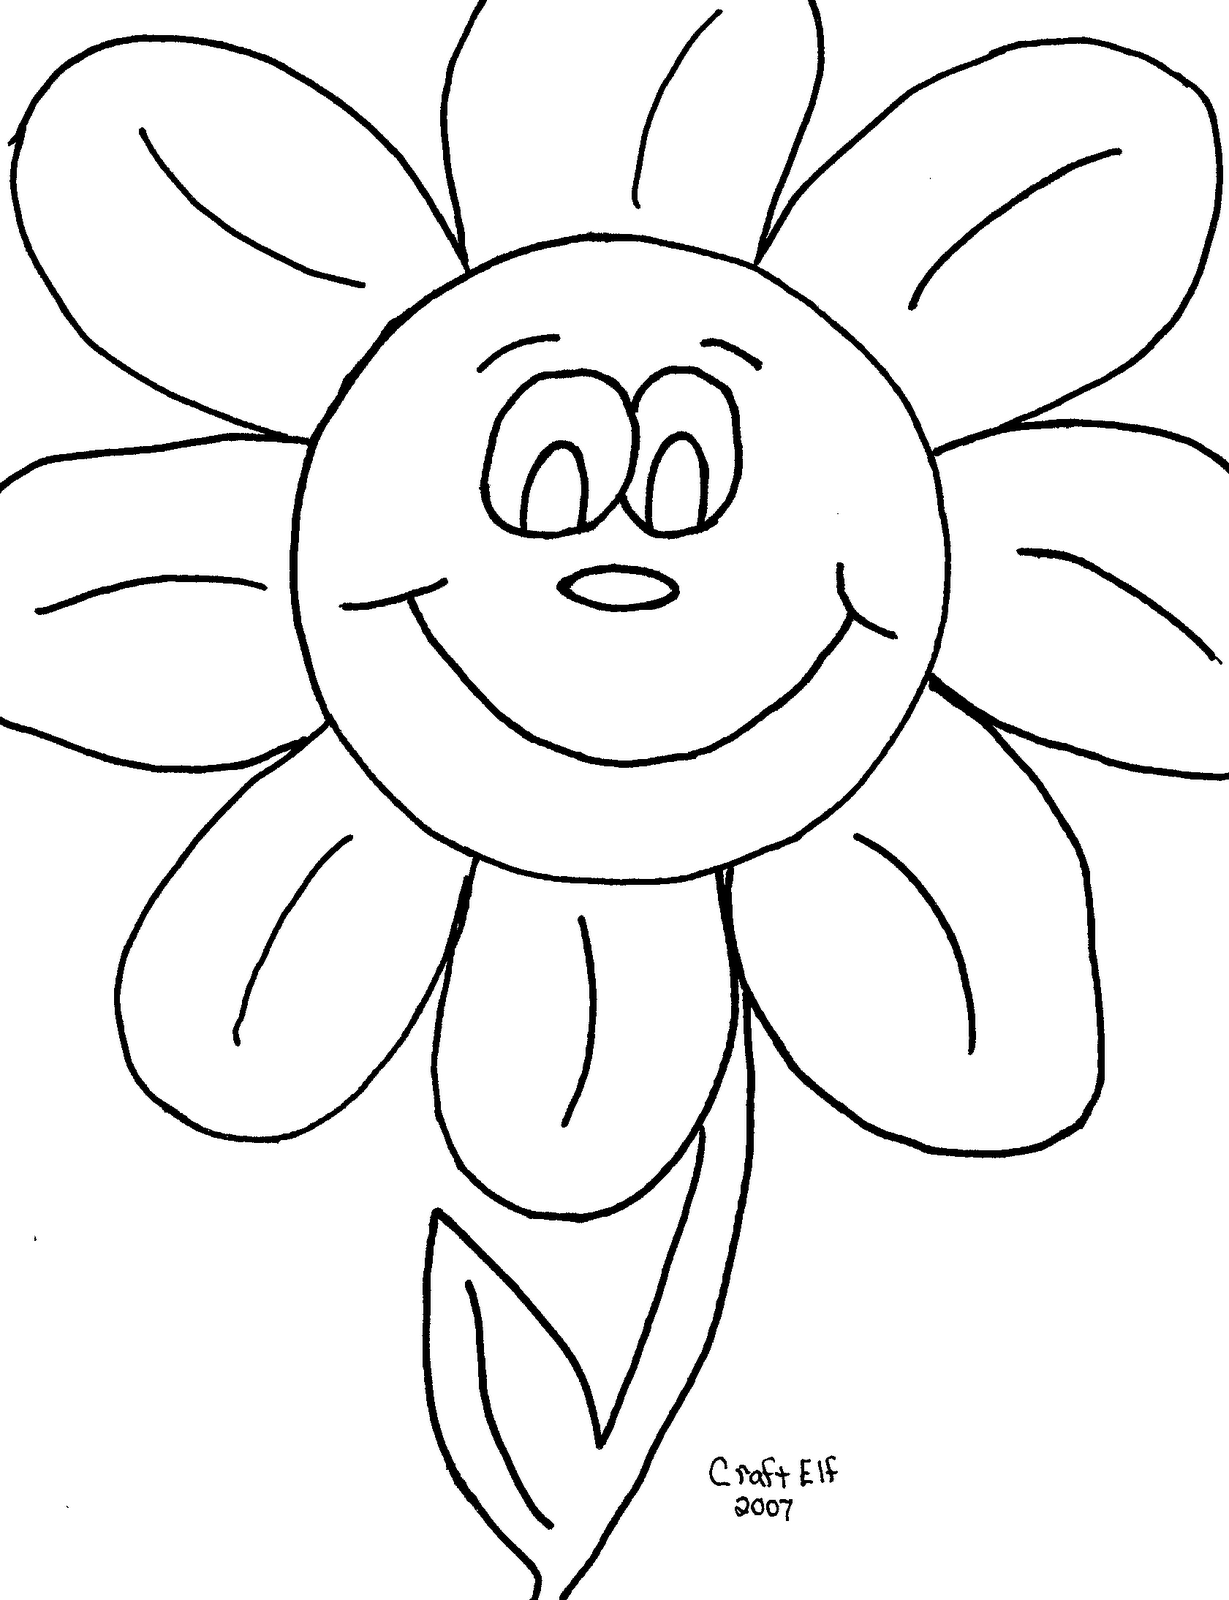 Coloring Pages For Pre Kindergarten - Coloring Home